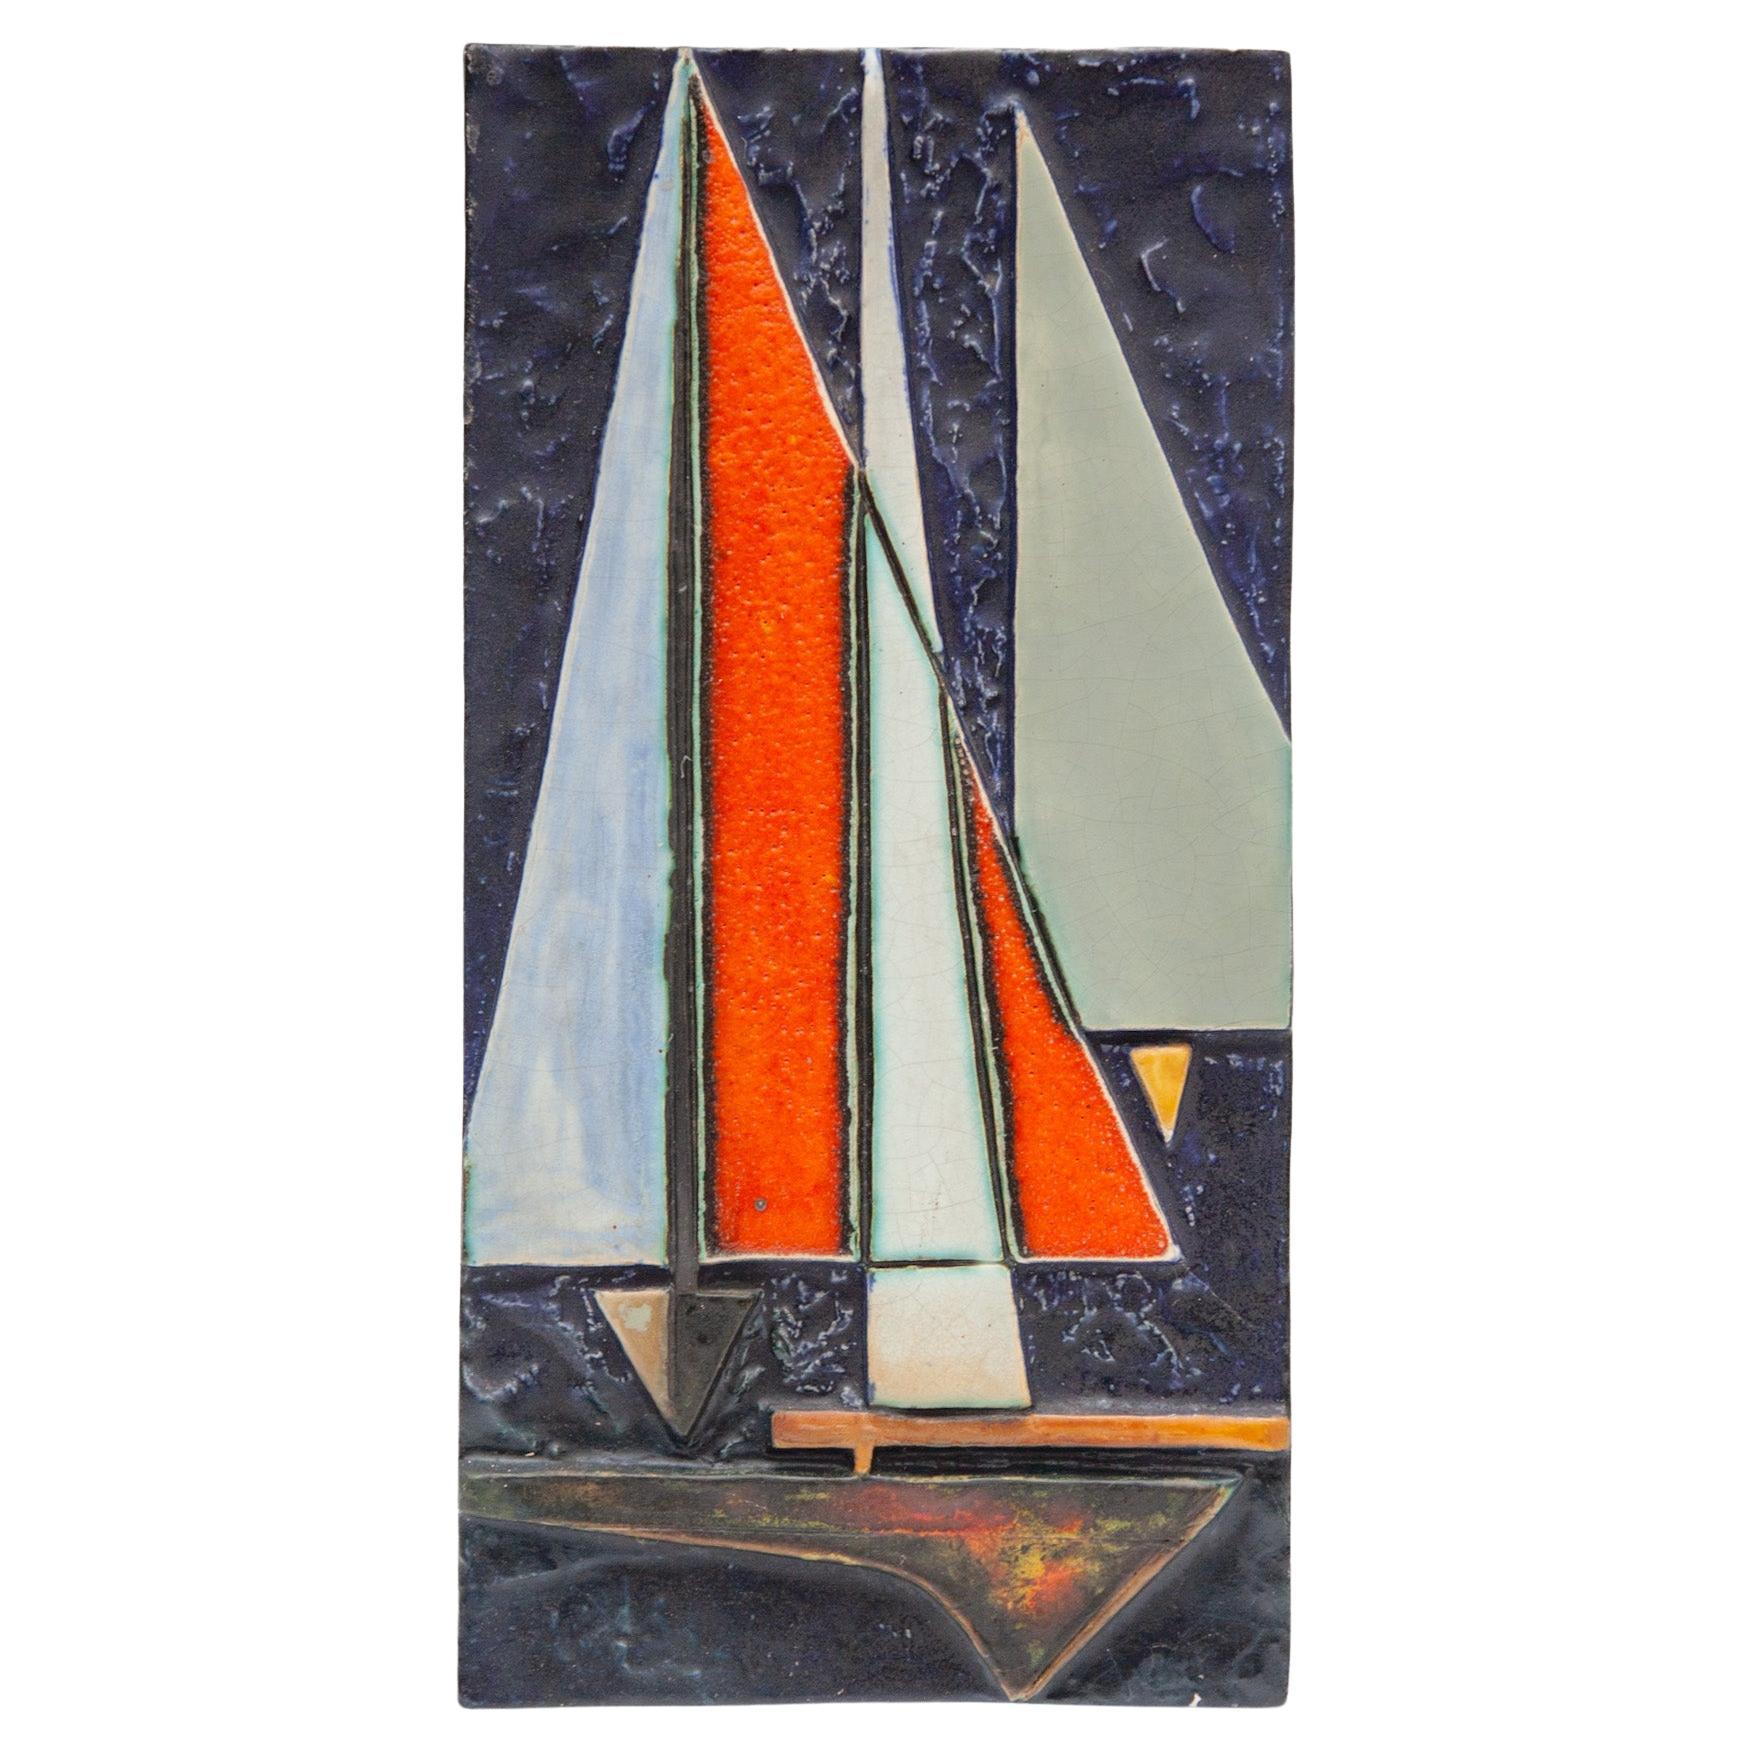 German Abstract Sailing Boat Wall Mounted Tile by Helmut Schäffenacker, 1960s